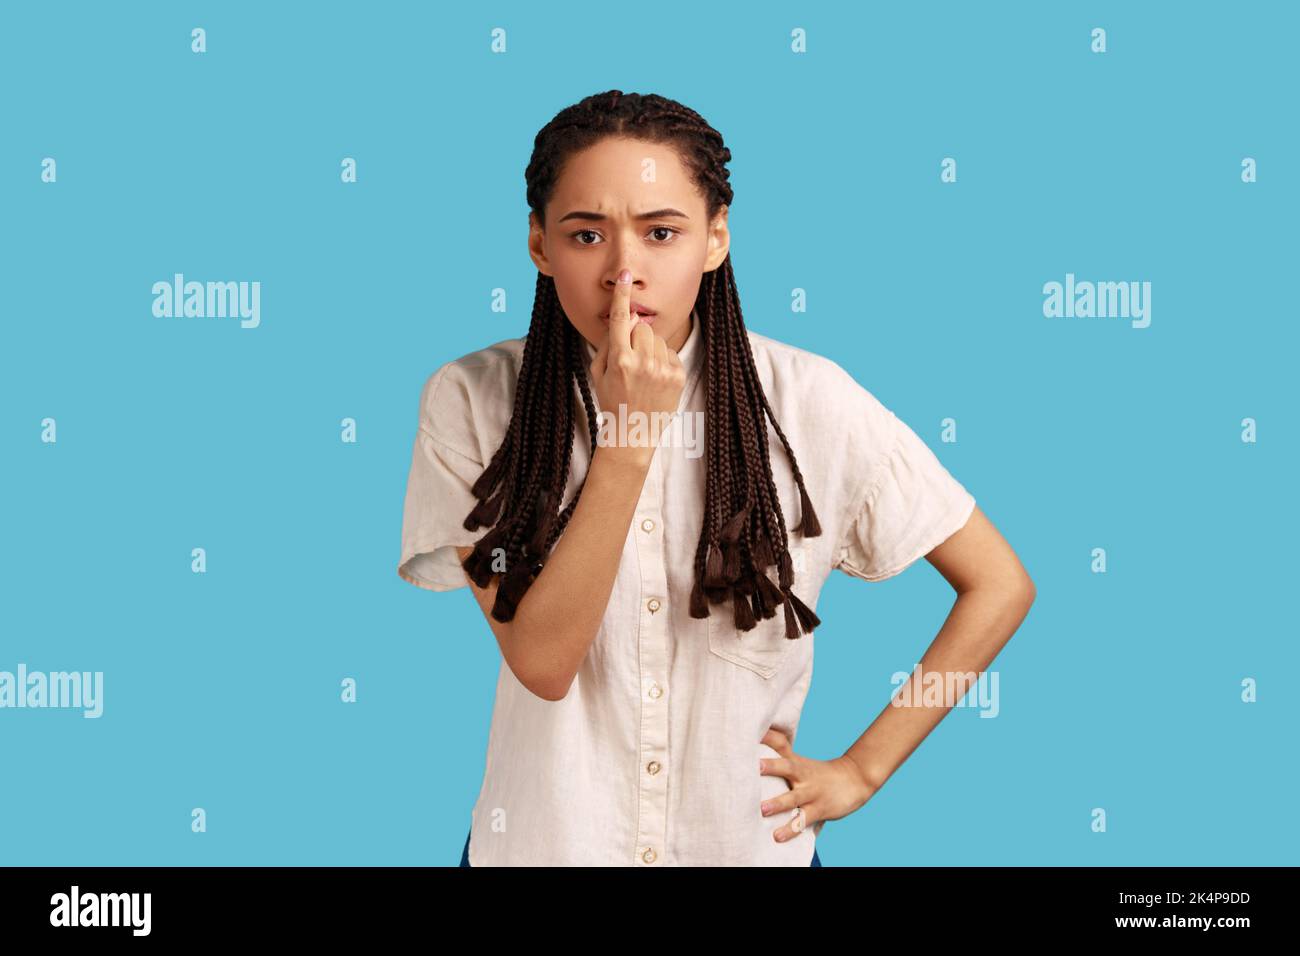 You are liar. Portrait of serious woman with black dreadlocks standing with finger on her nose and showing lie gesture, wearing white shirt. Indoor studio shot isolated on blue background. Stock Photo